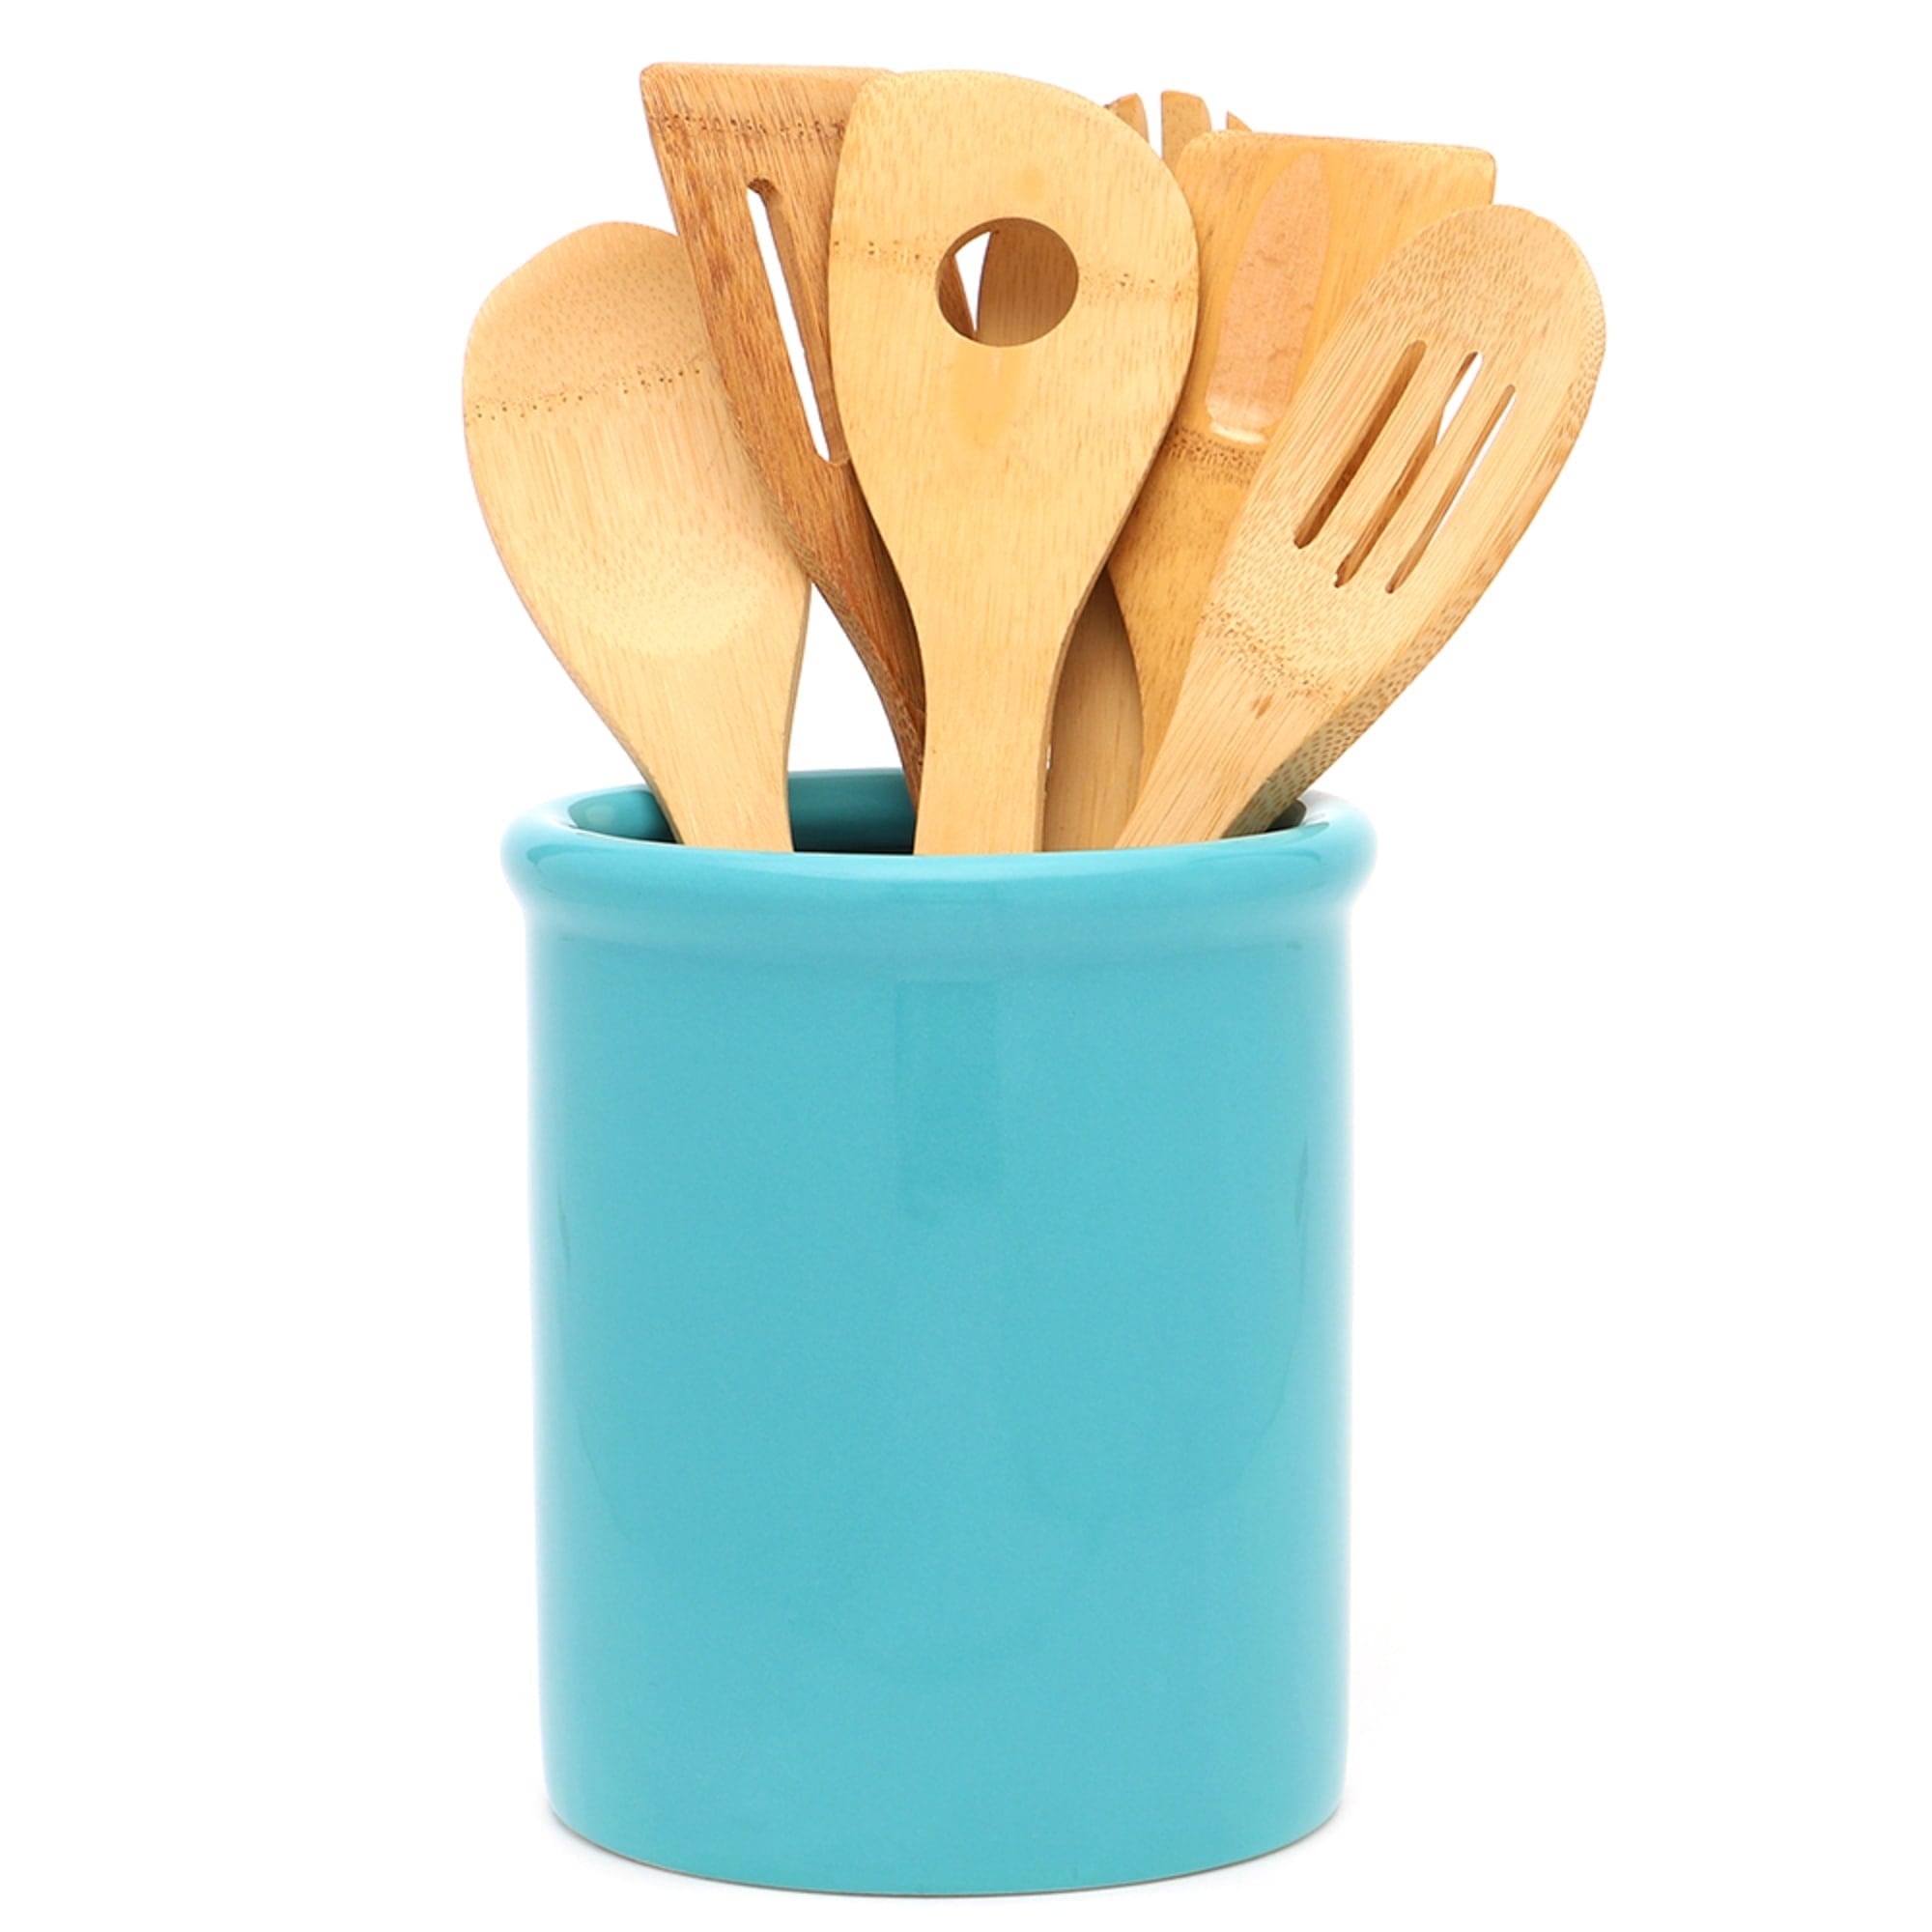 Teal Kitchen Utensil Holder, 6.7 Utensil Holder for Kitchen Counter,  Cooking Utensil Crock with Cork Bottom, Turquoise Kitchen Decor and  Accessories